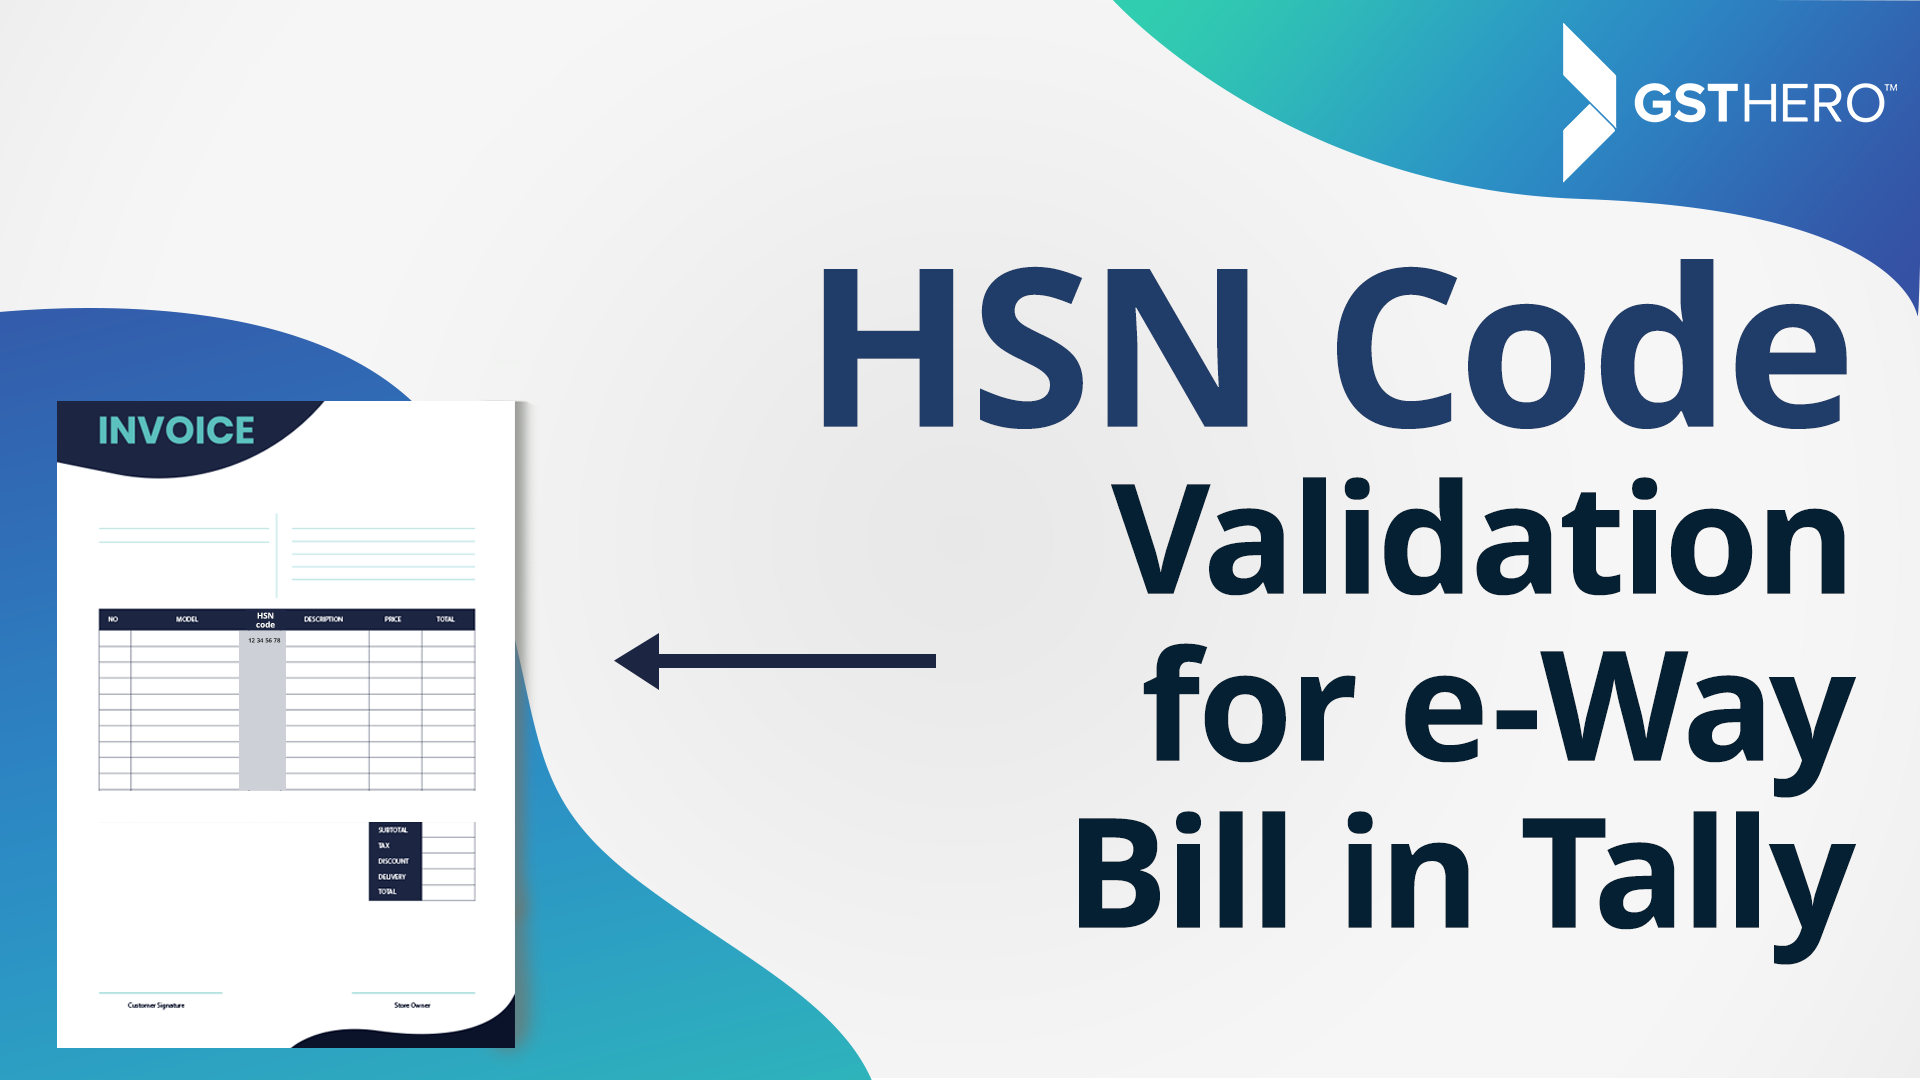 HSN Code under GST How to Validate HSN Code for EWay Bill in Tally?